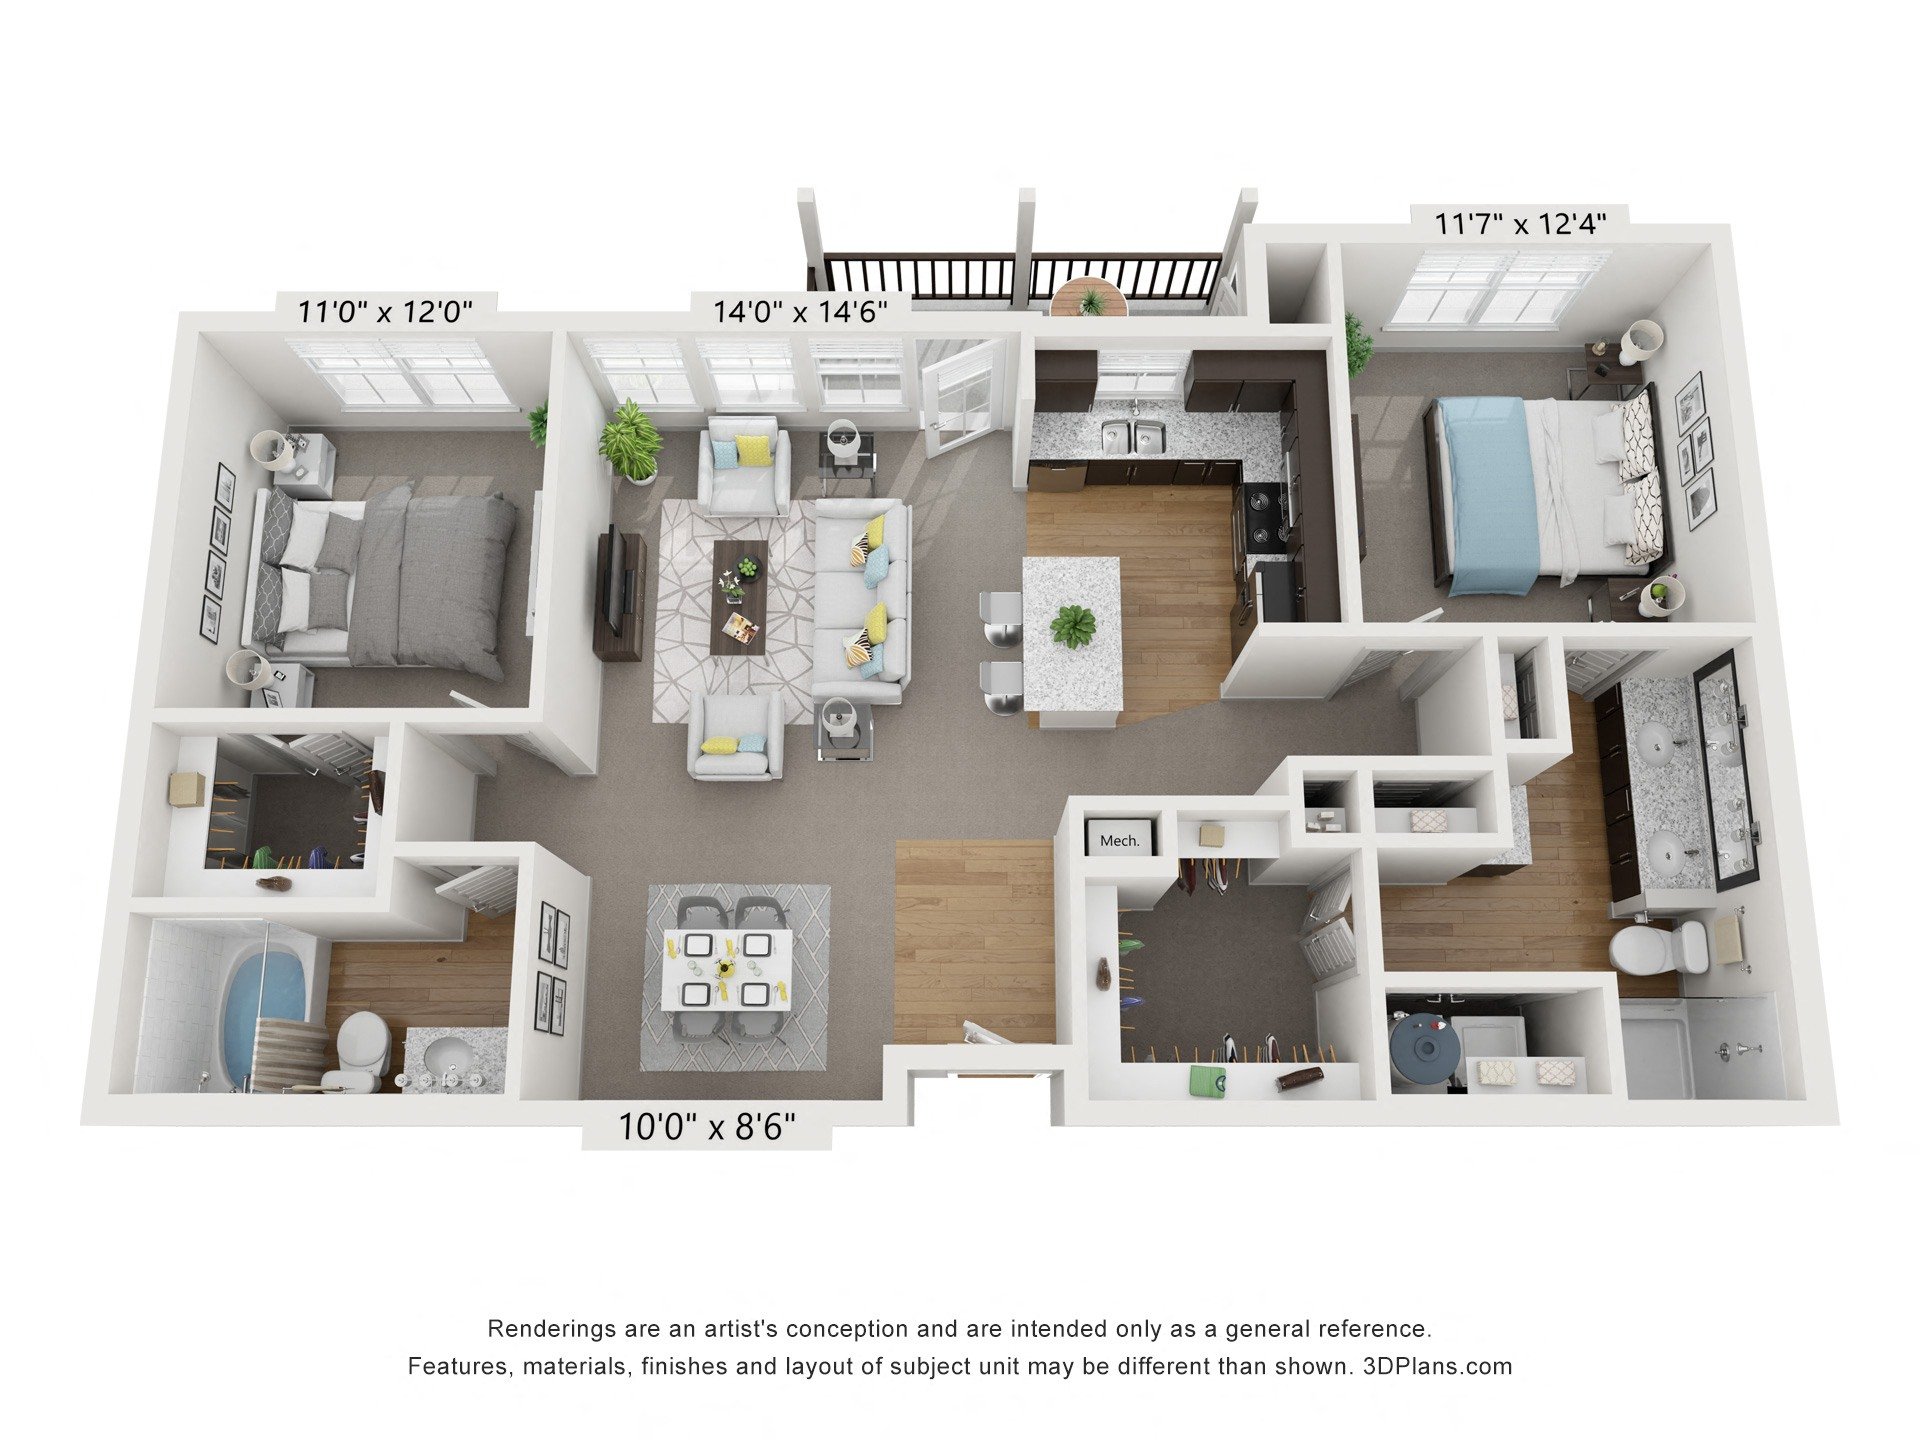 a floor plan of a 1 bedroom apartment with a bathroom and a living room